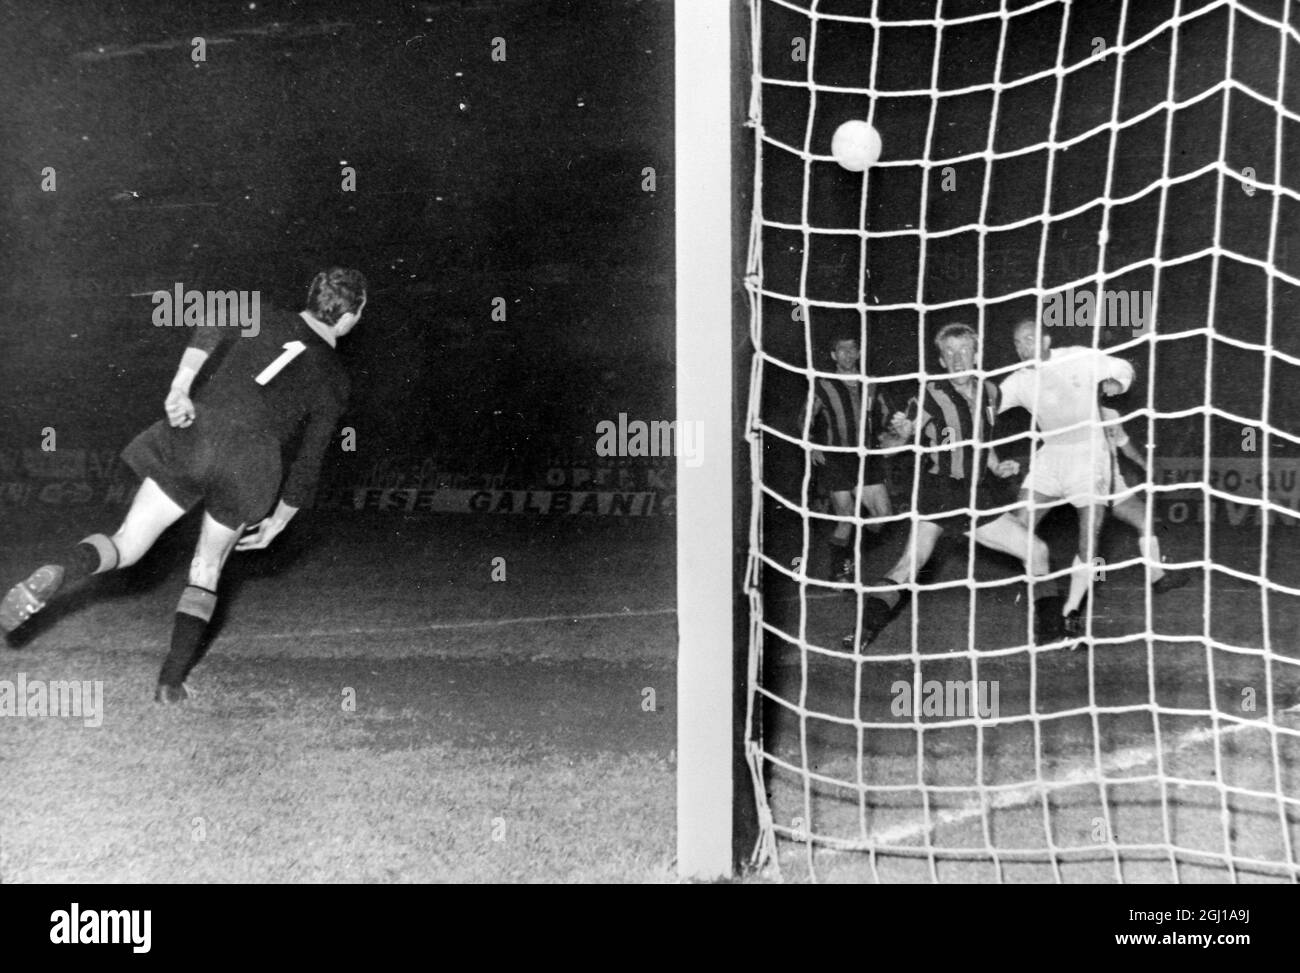 INTER MAILAND V REAL MADRID - EUROPEAN CUP OF LEAGUE CHAMPIONS FINAL, FUSSBALL IN AKTION IN WIEN, ÖSTERREICH ; 28. MAI 1964 Stockfoto